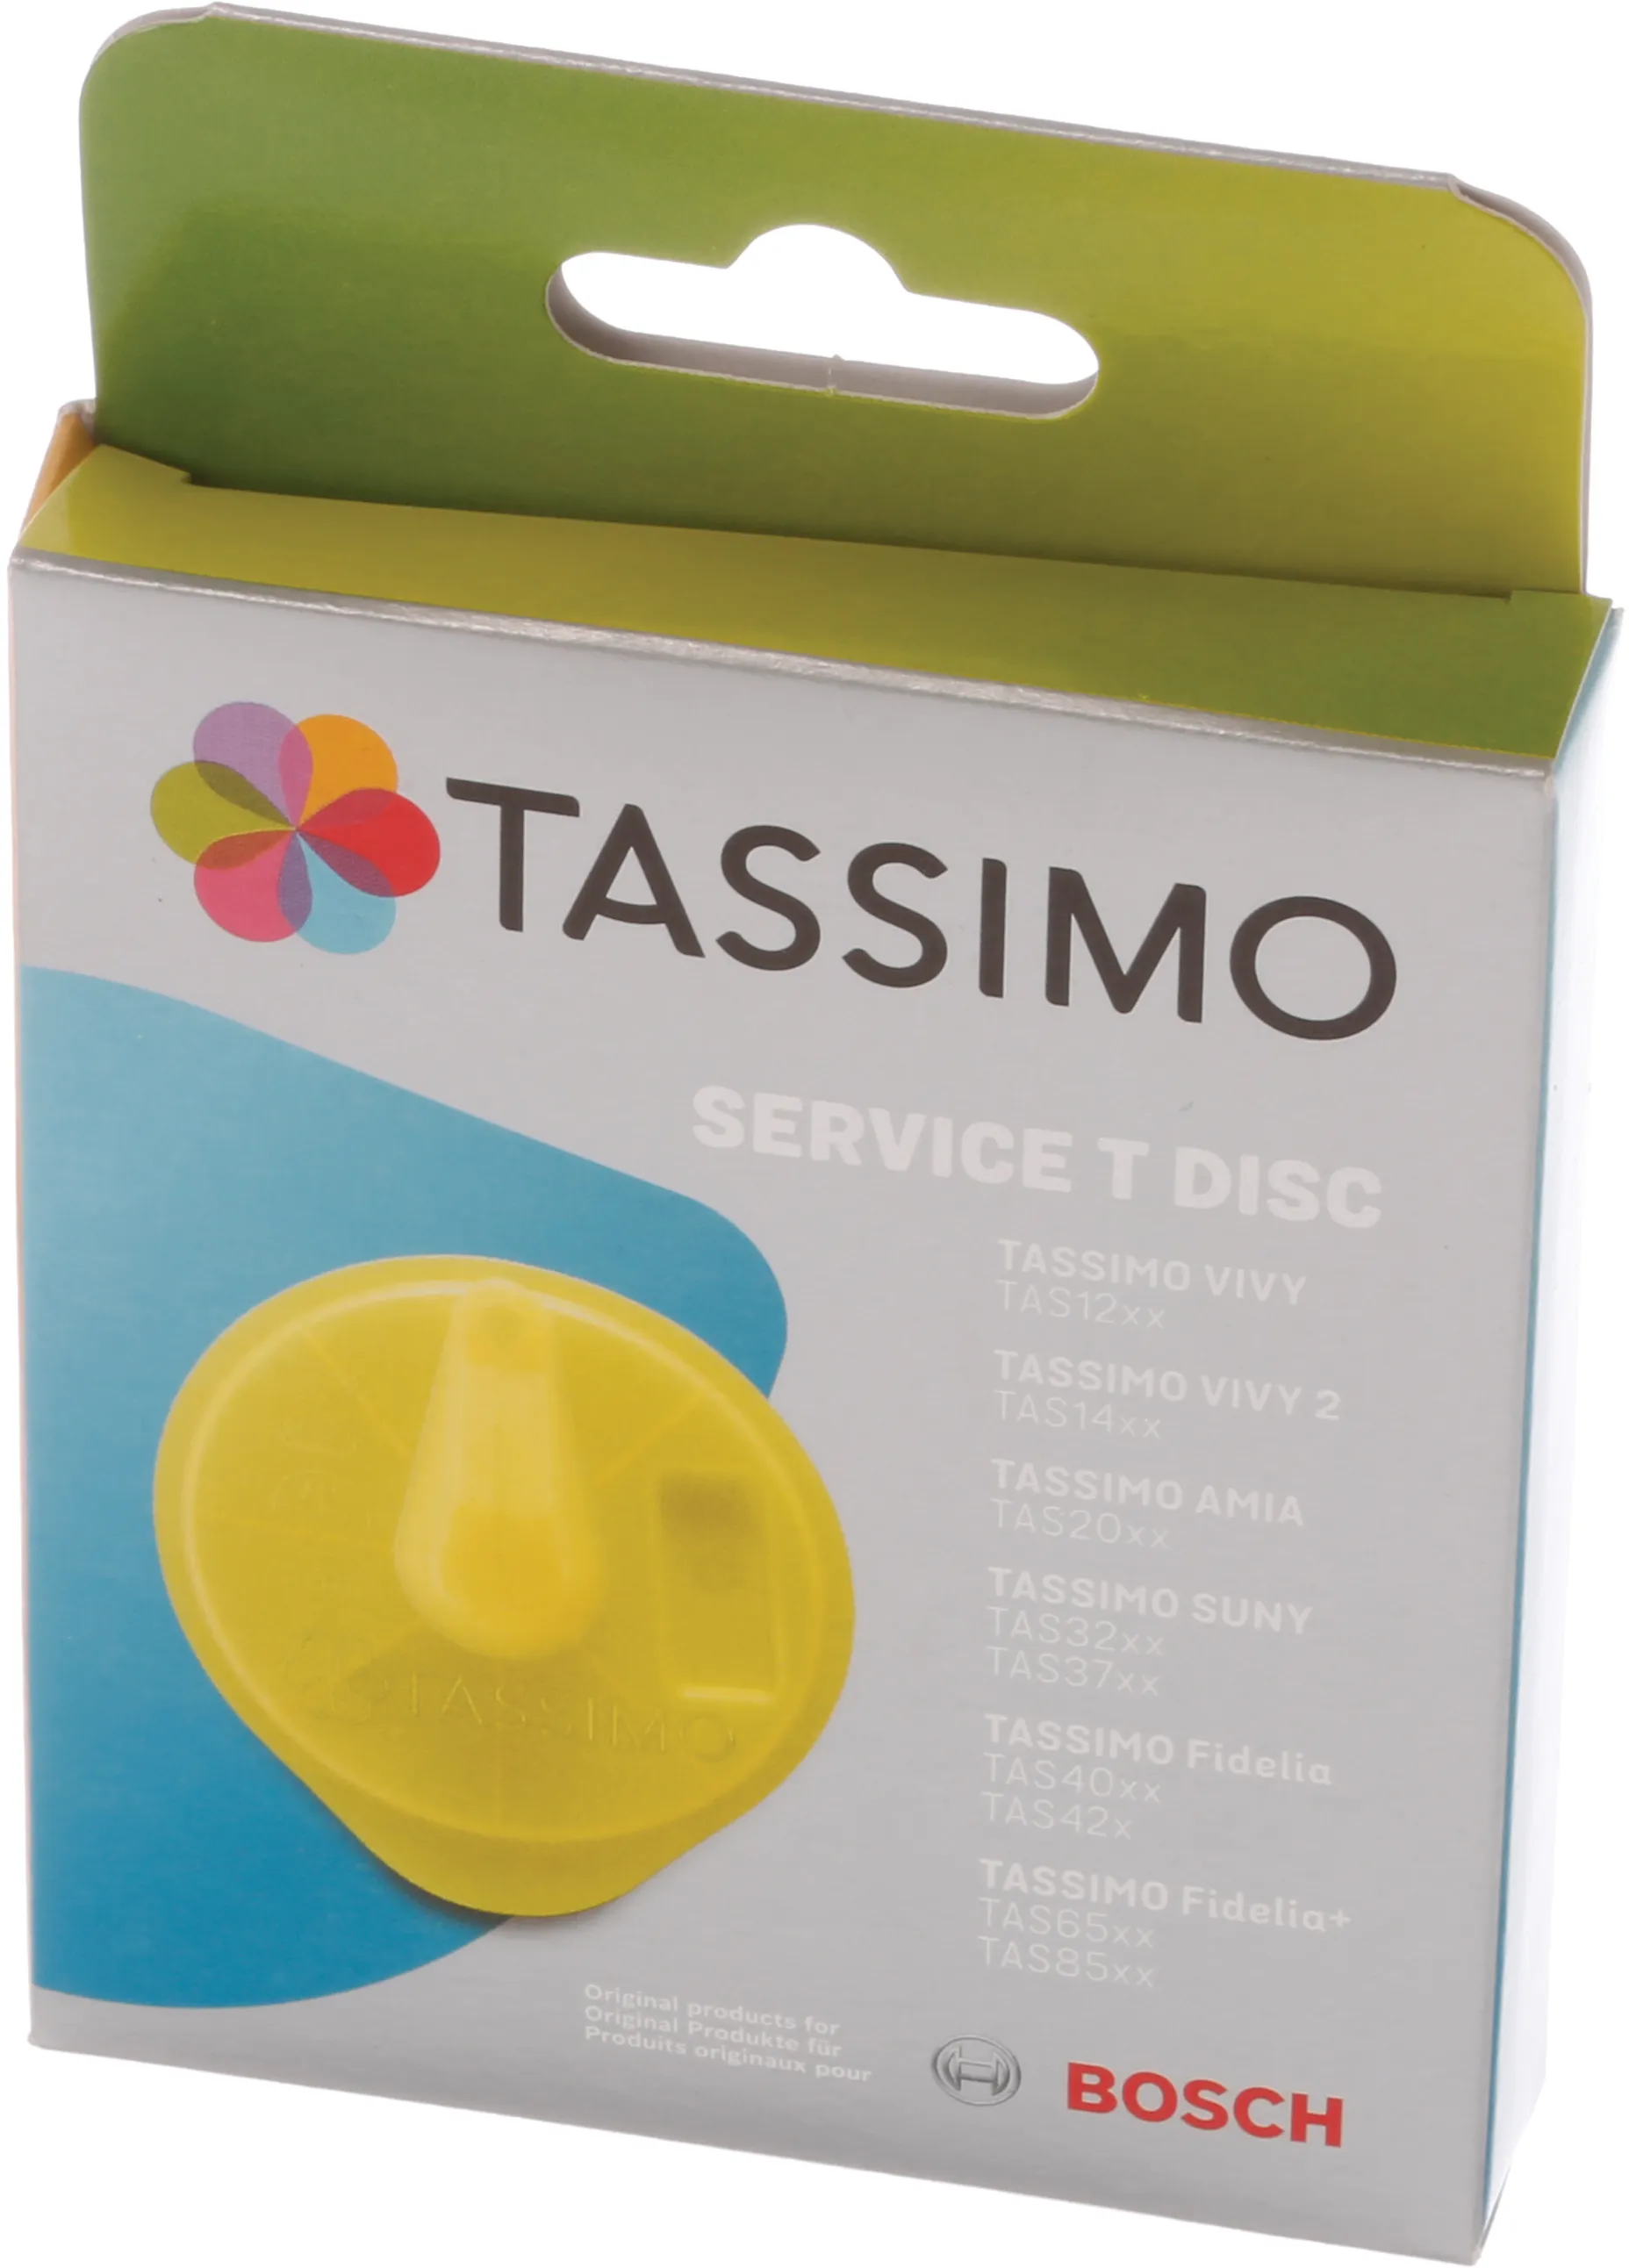 Tassimo Yellow Service T-disc - only £6.00 with